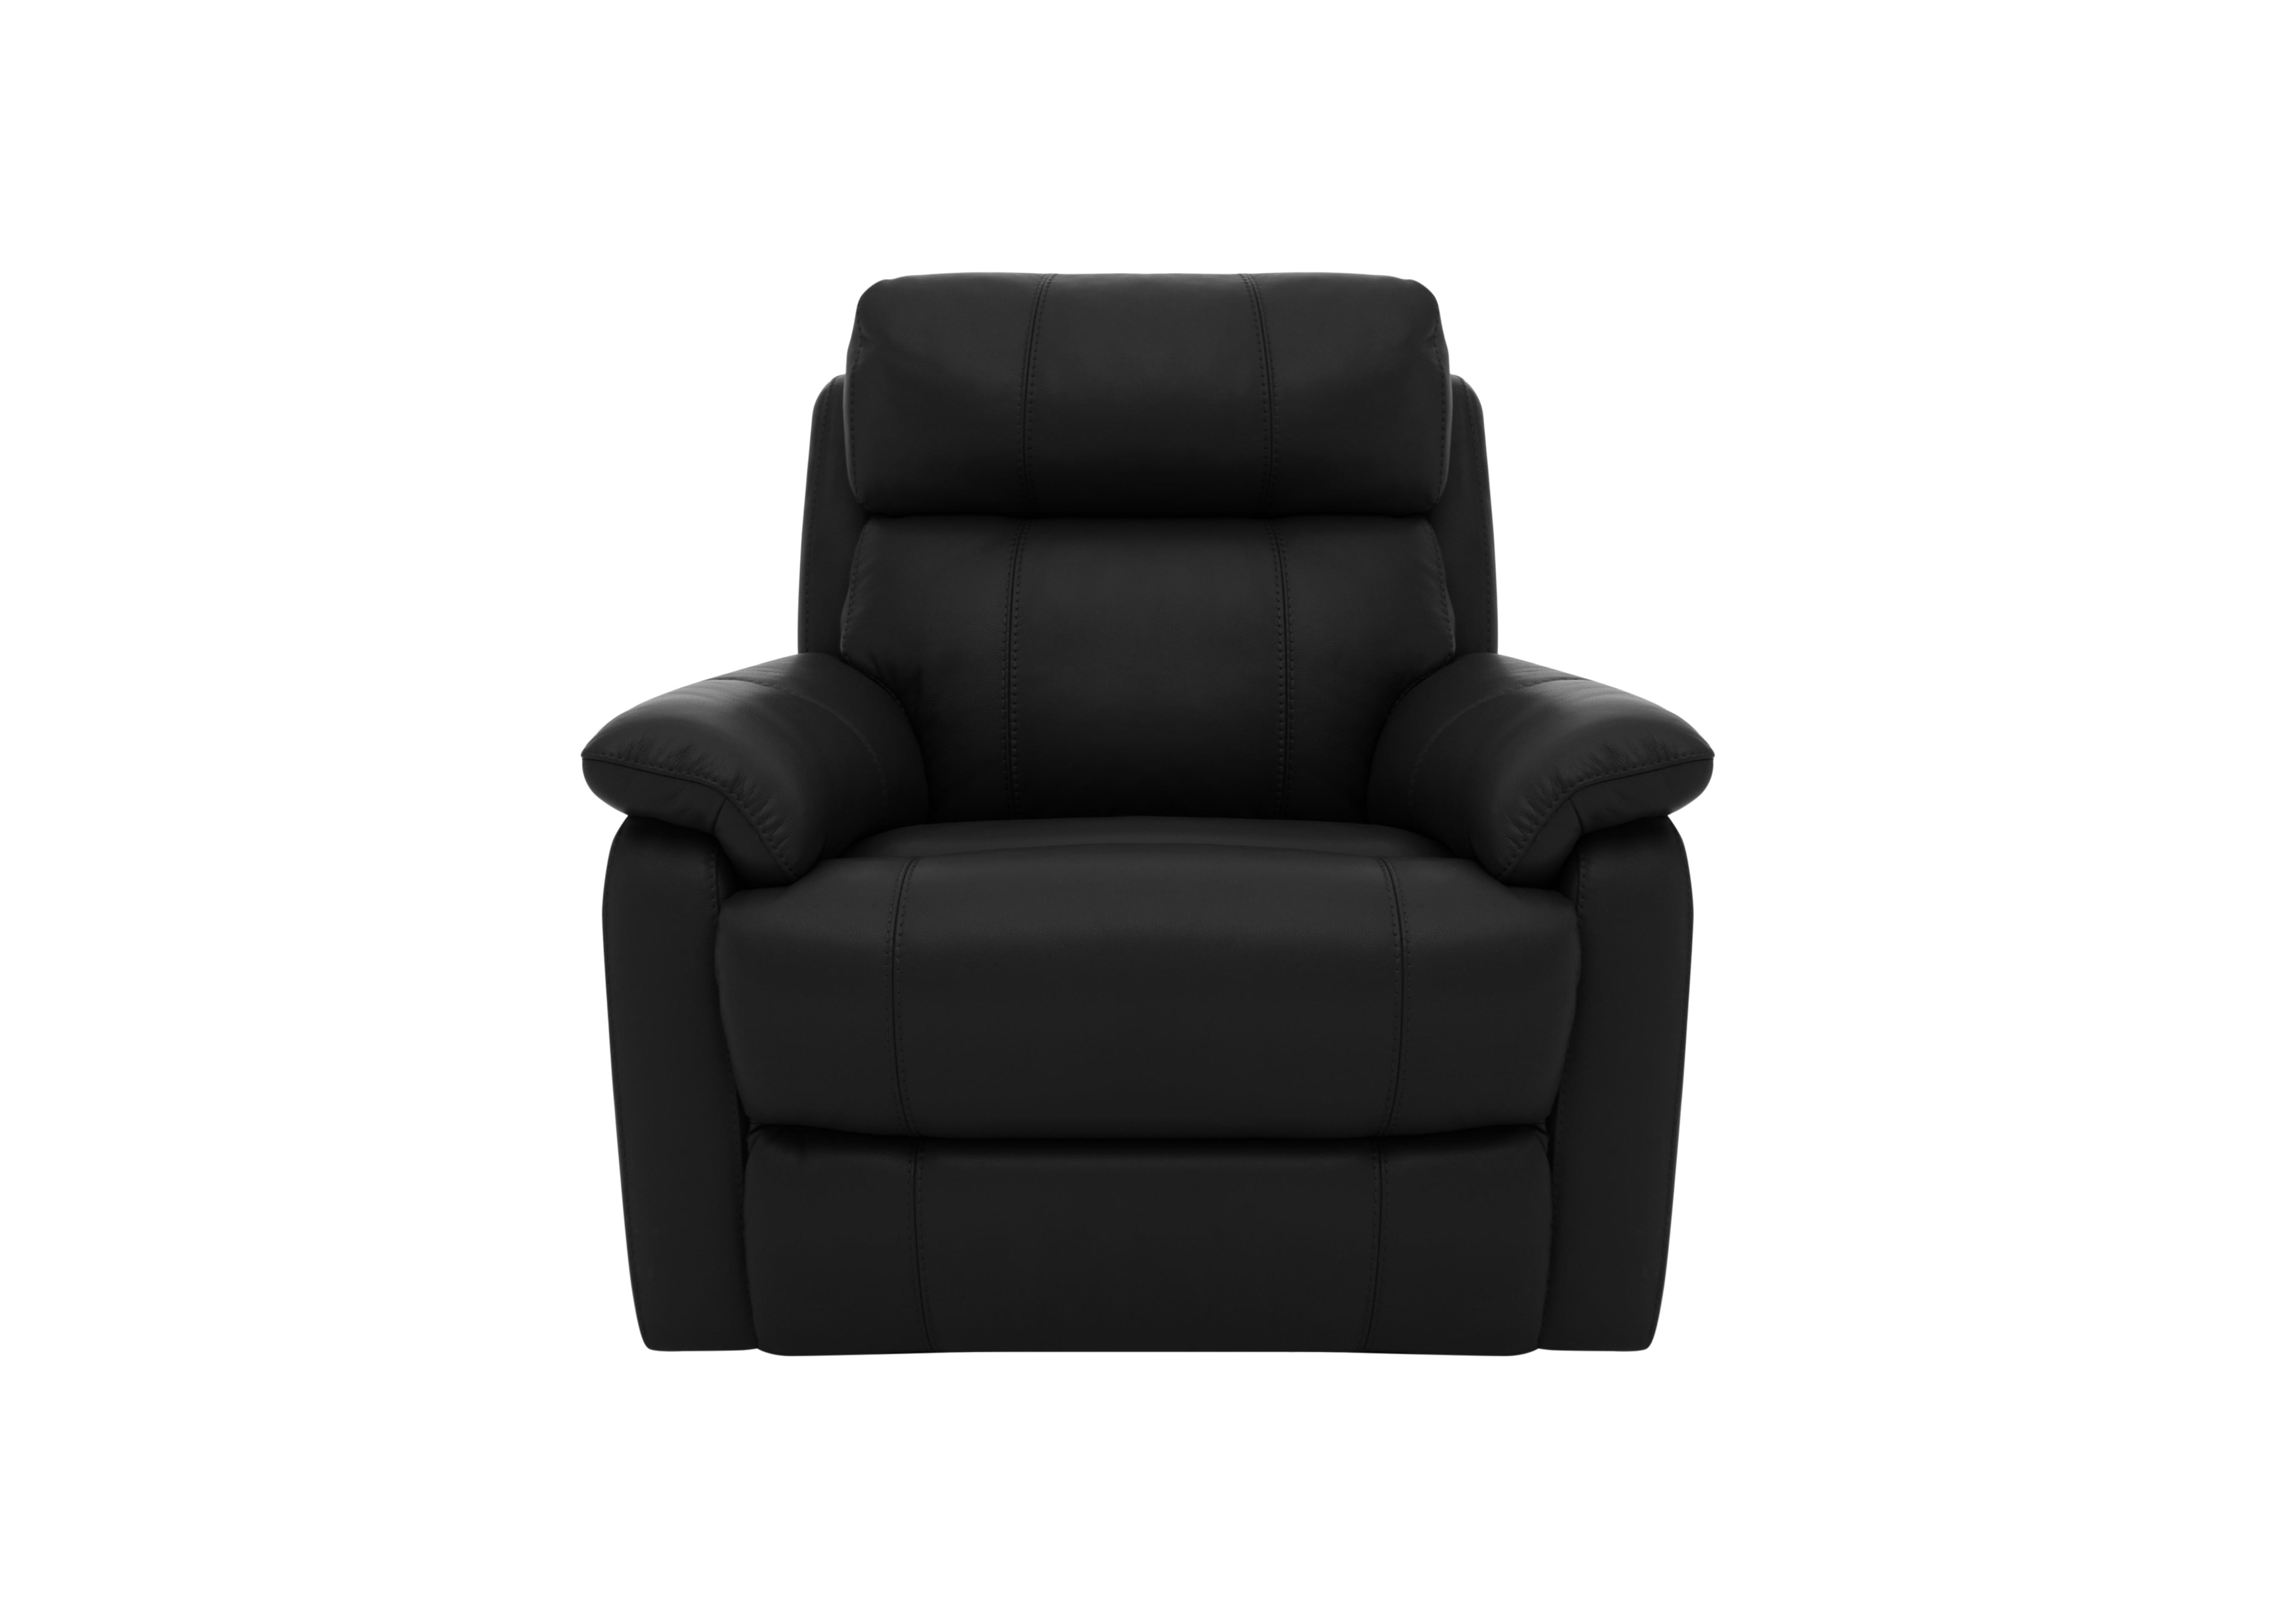 Relax Station Komodo Leather Power Armchair in Bv-3500 Classic Black on Furniture Village